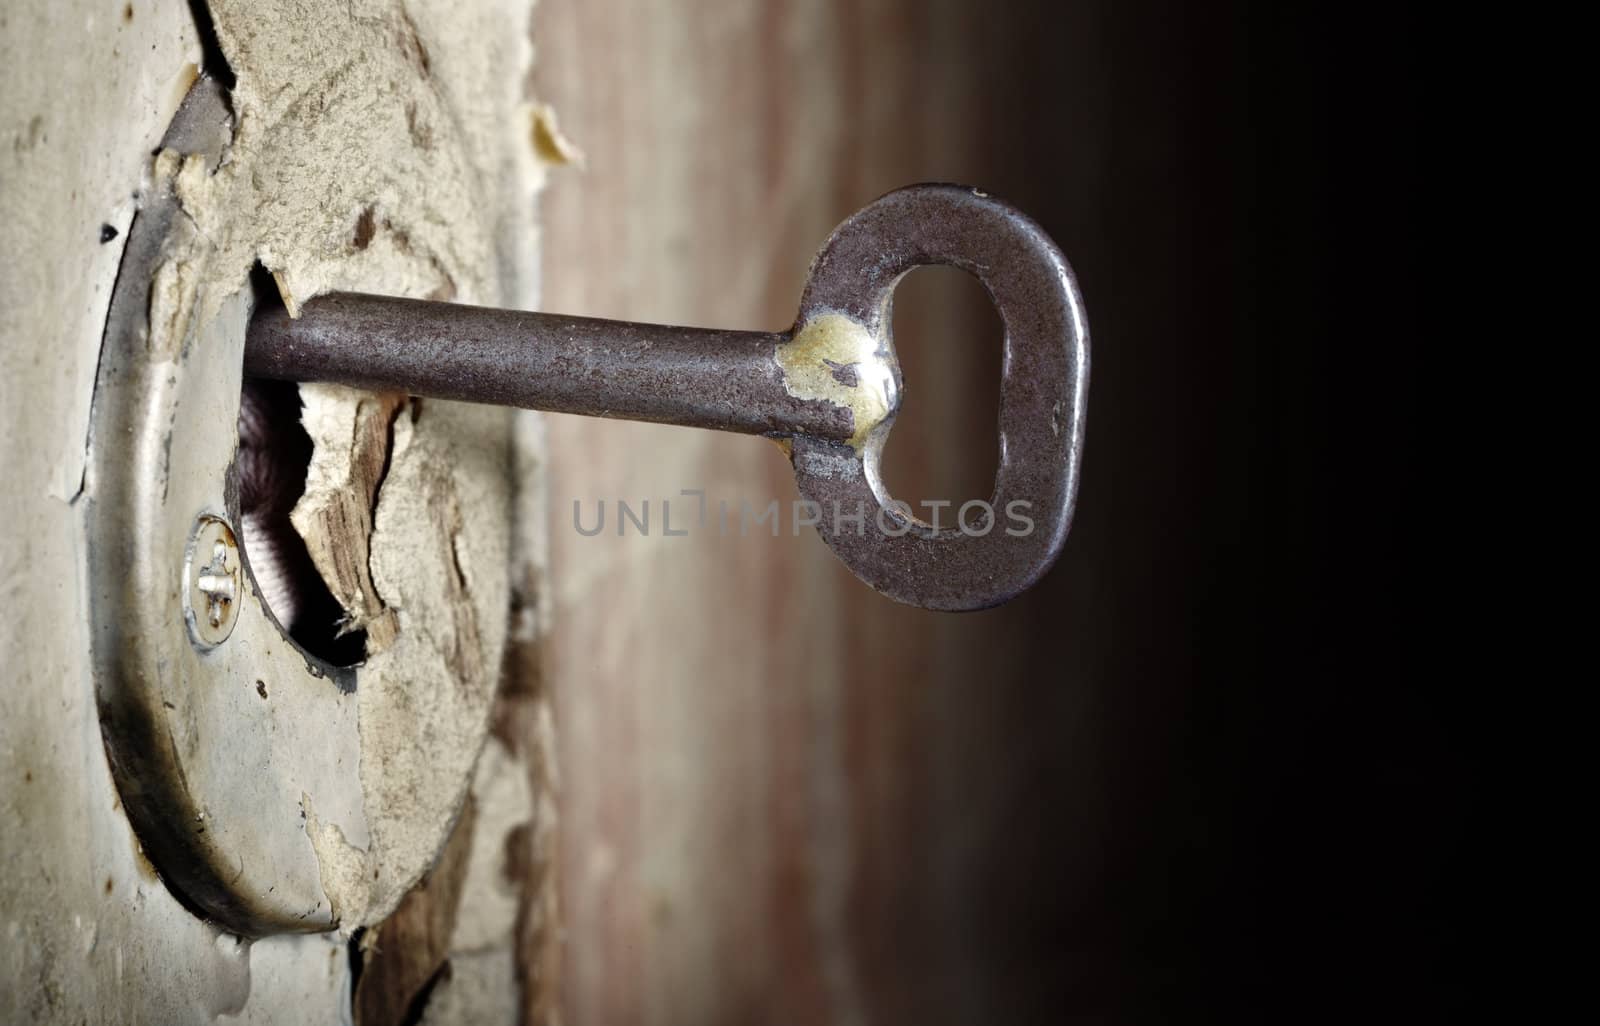 CLose-up photo of the old key inserted into the damaged lock